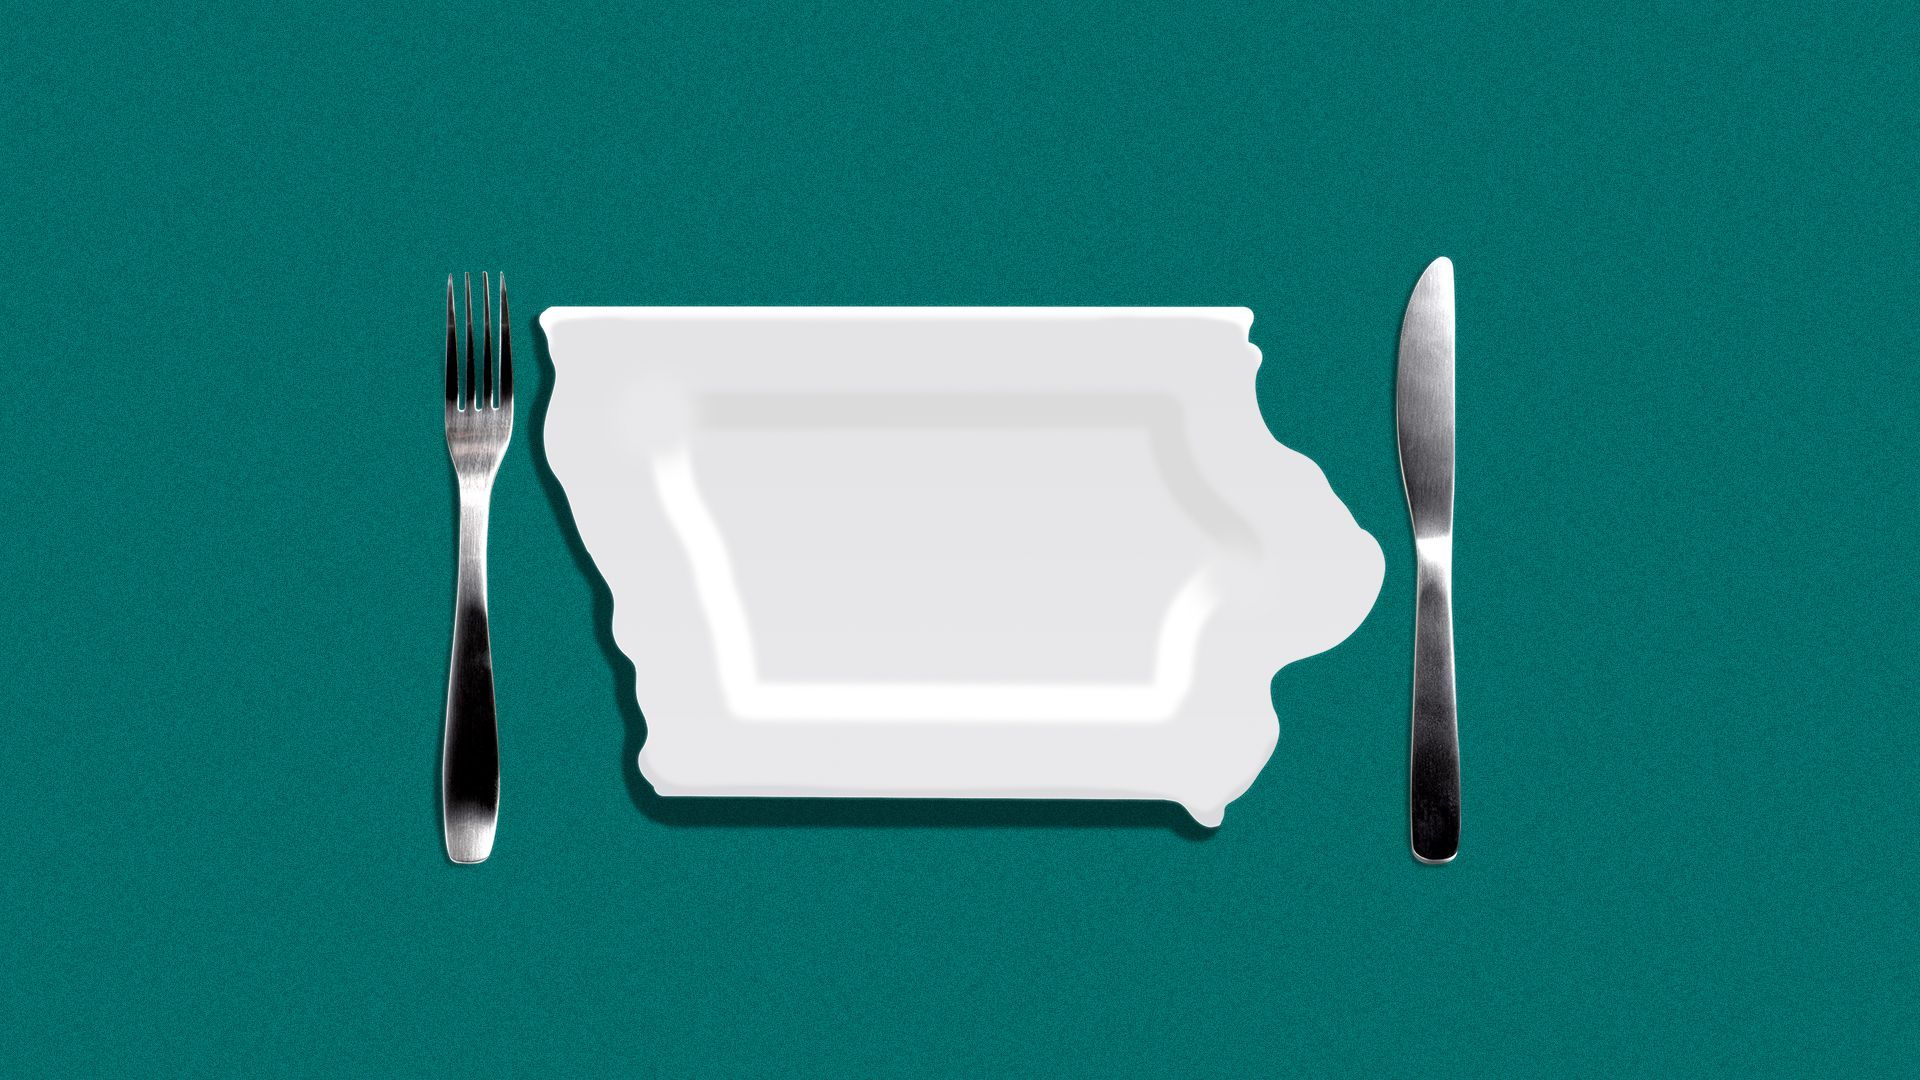 Illustration of a place setting with a plate in the shape of Iowa.